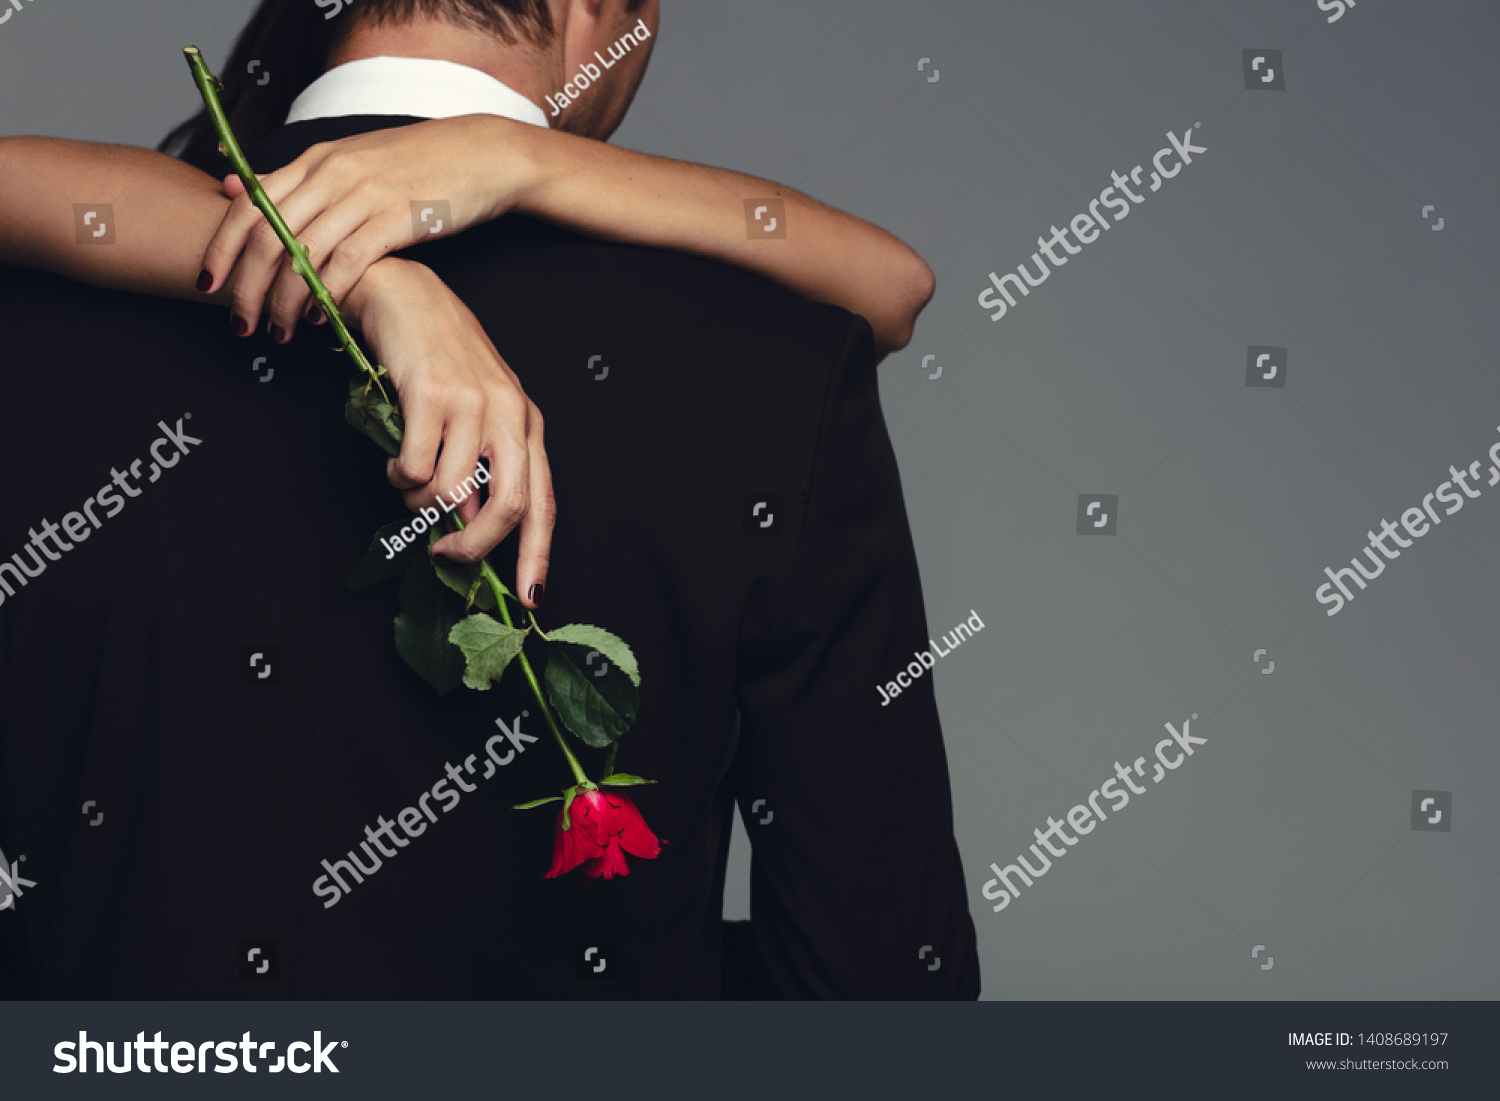 Rear view of woman holding a rose embracing man in black suit. Loving couple embracing on grey background. #1408689197